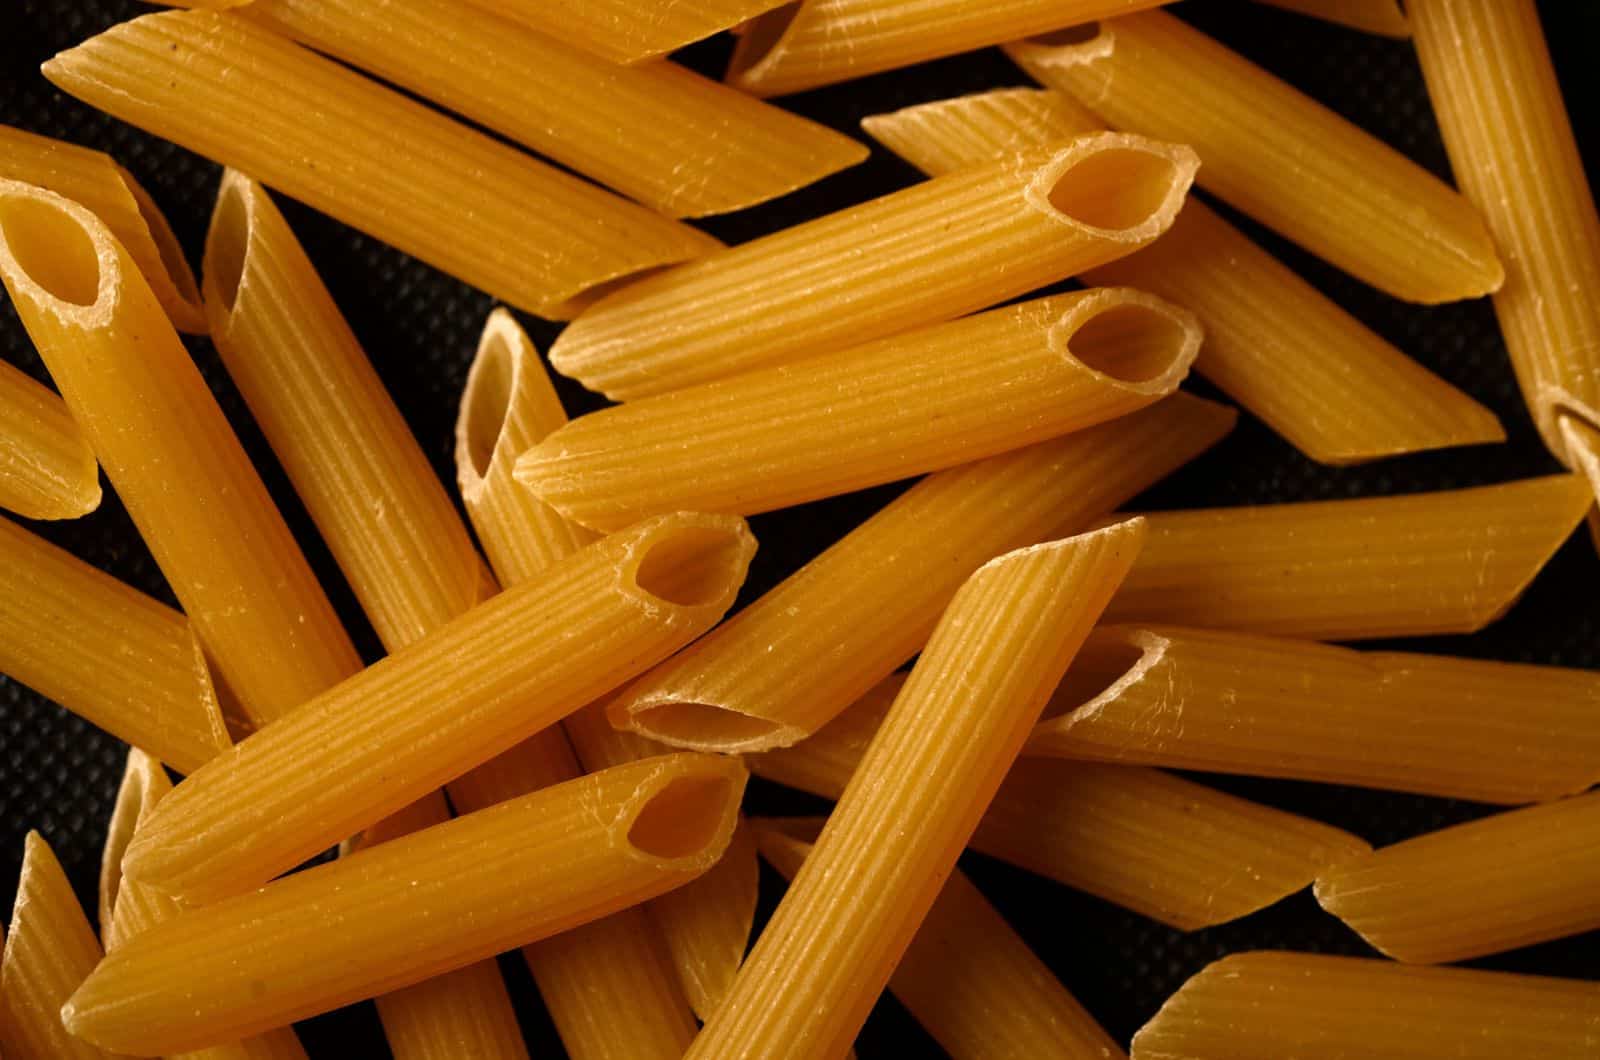 Dry pasta on the table